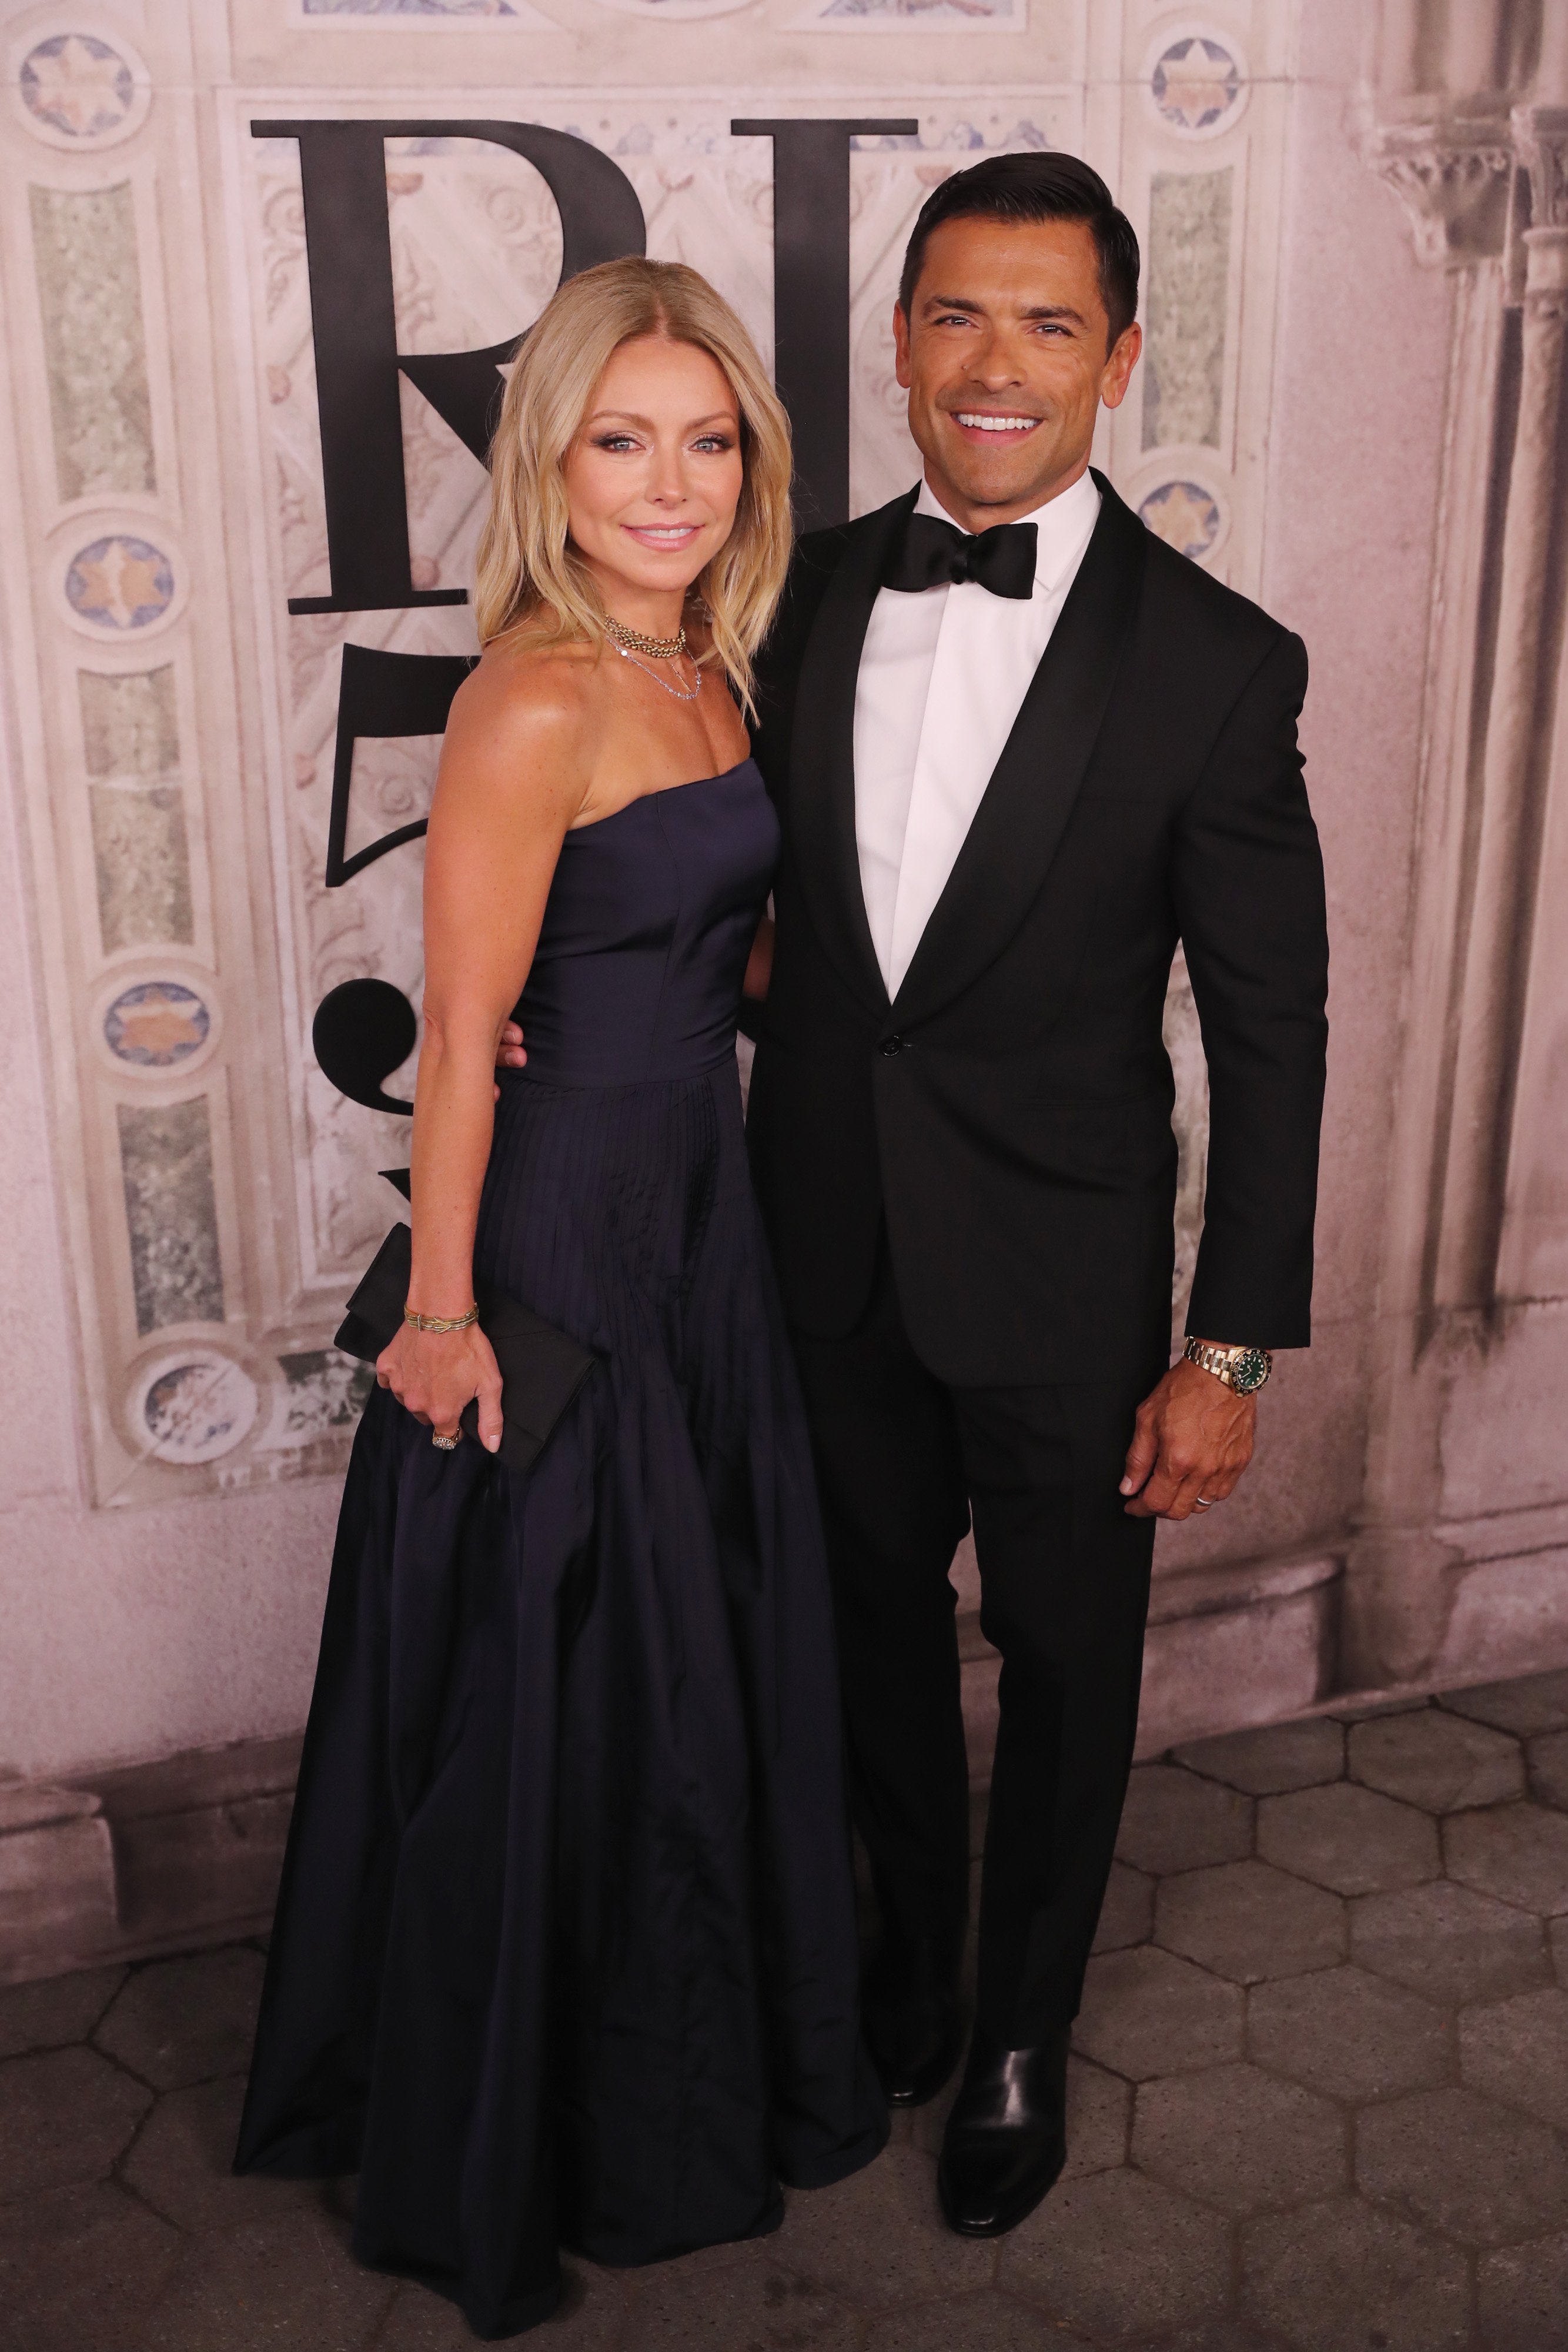 Kelly Ripa and Mark Consuelos attend the Ralph Lauren fashion show in New York City on September 7, 2018 | Photo: Getty Images